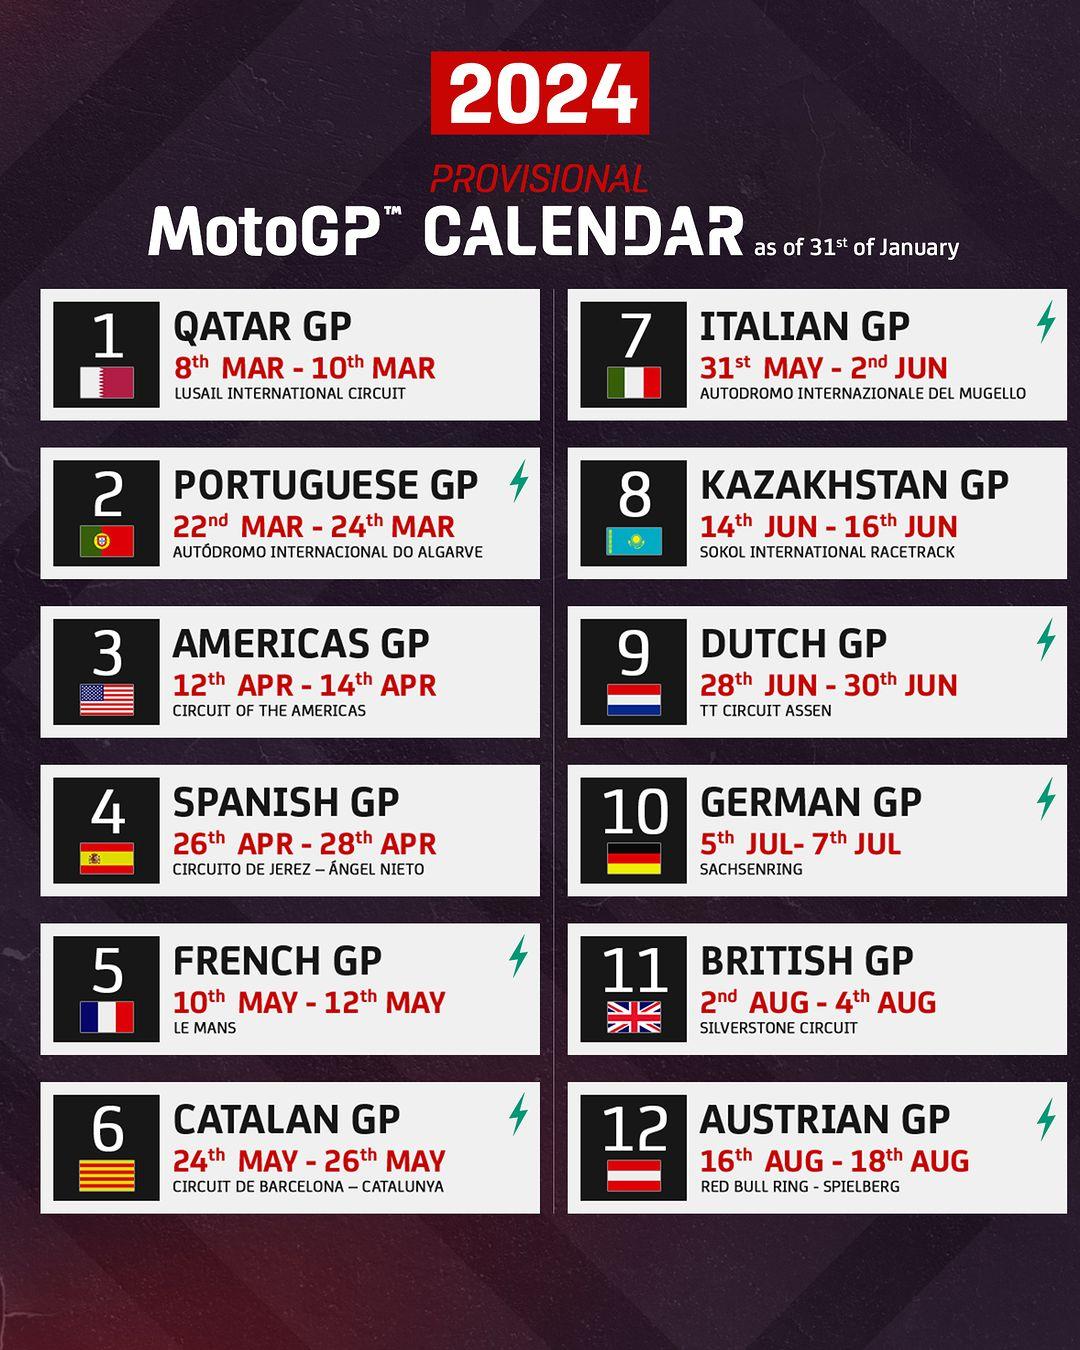 With 21 Grands Prix instead of 22, the 2024 season will still be a record-breaking one! 🙌 Check out the updated version of the calendar! 🗓️

#MotoGP2024 #MotoGP #Motorsport #Motorcycle #Racing